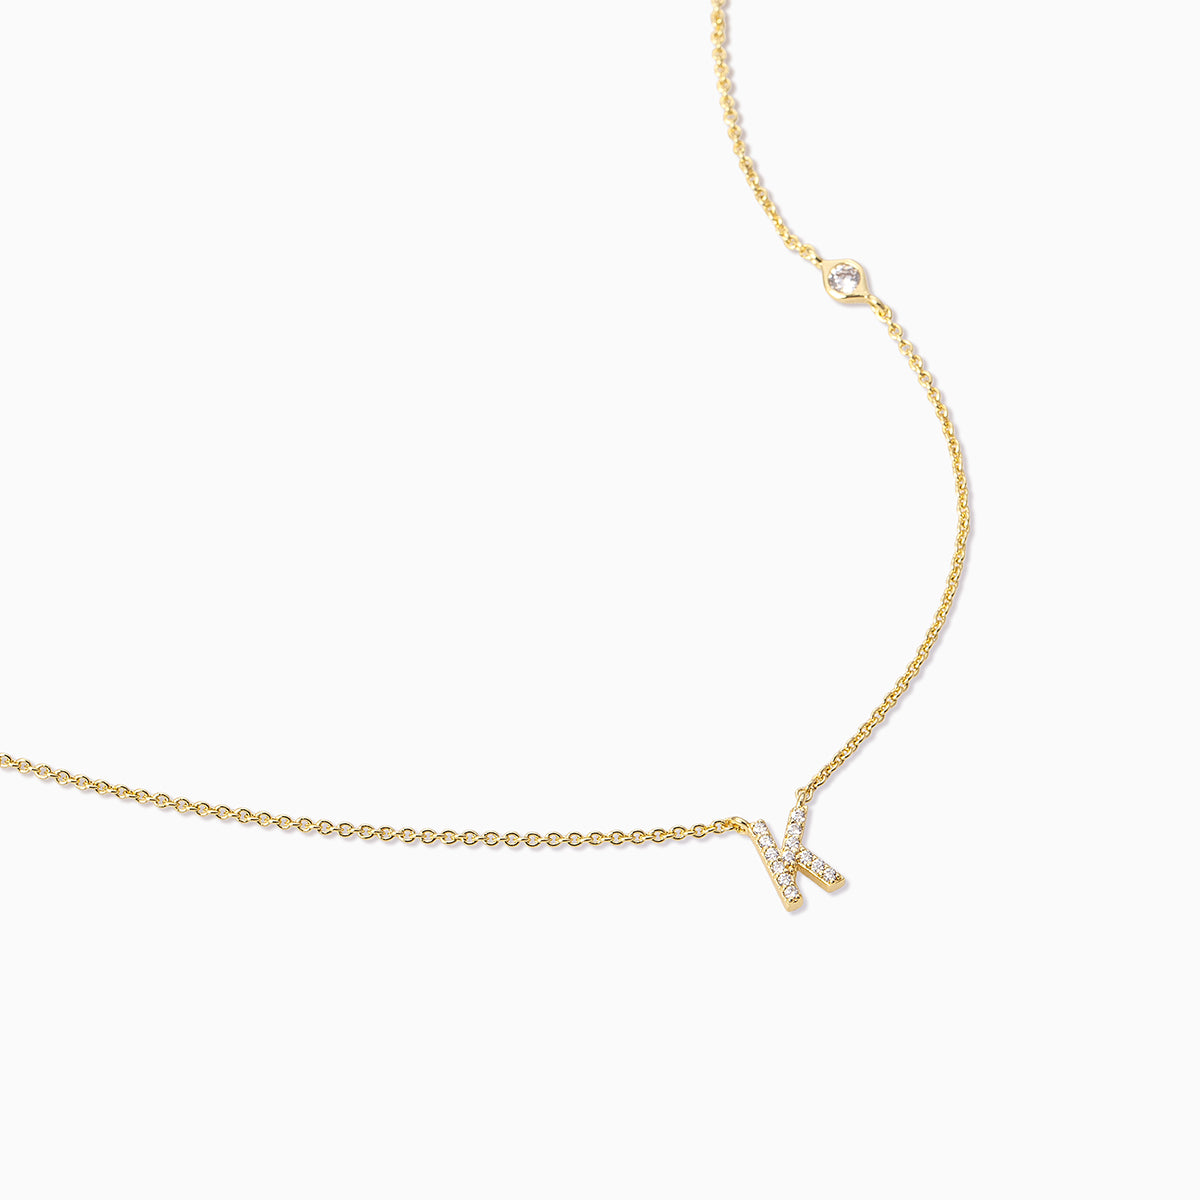 Pavé Initial Necklace | Gold A Gold B Gold C Gold D Gold E Gold F Gold G Gold H Gold I Gold J Gold K Gold L Gold M Gold N Gold O Gold P Gold Q Gold R Gold S Gold T Gold U Gold V Gold W Gold X Gold Y Gold Z | Product Detail Image | Uncommon James